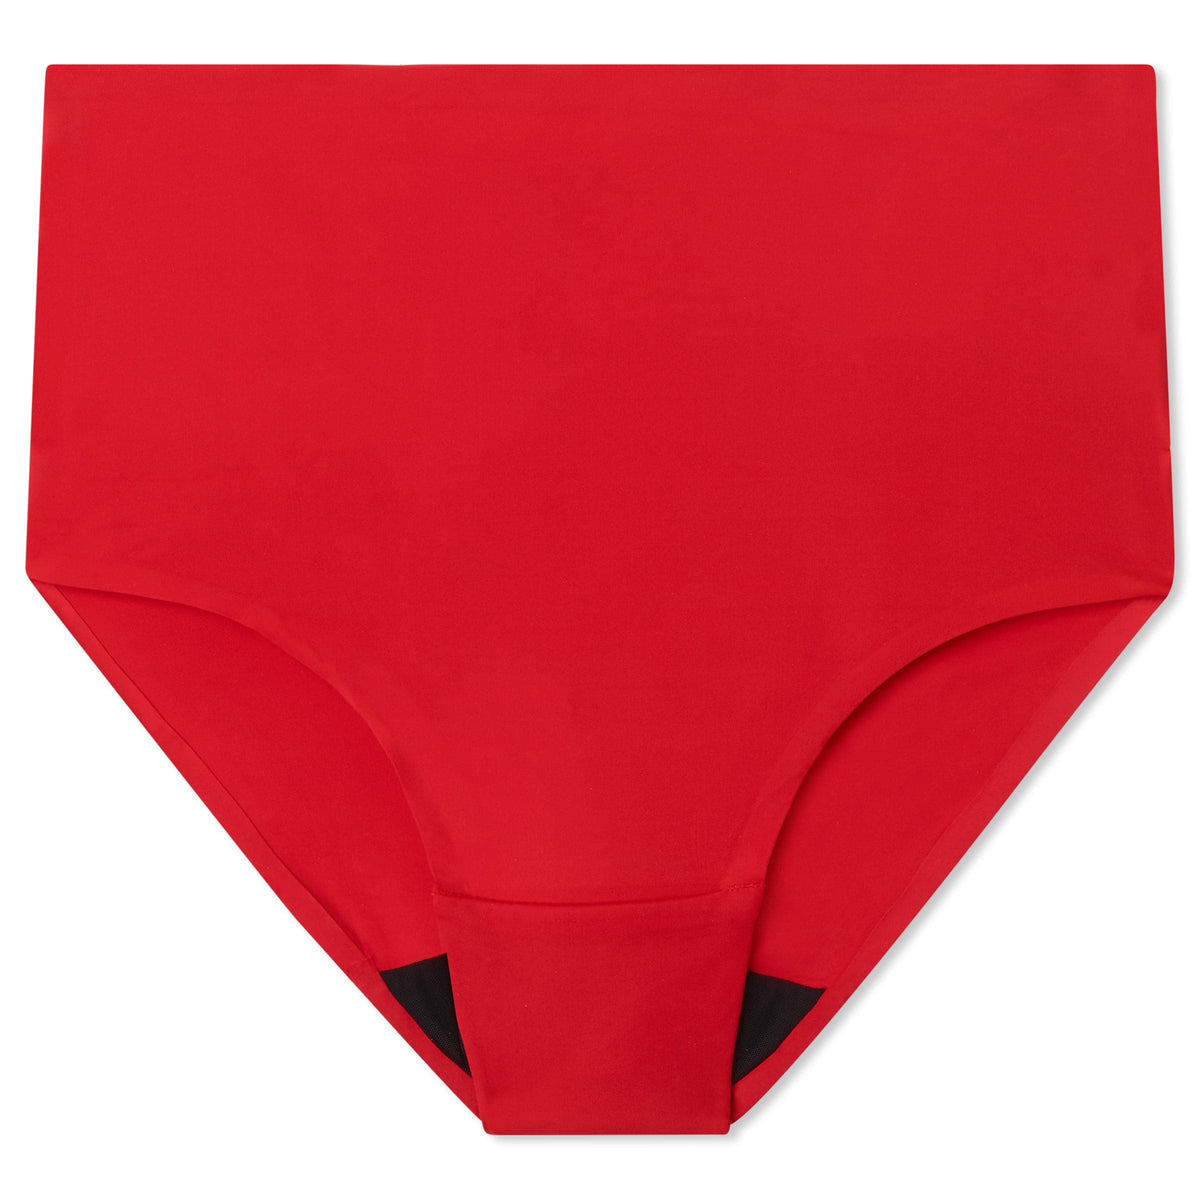 Ruby Love Period Underwear Review - Must Read This Before Buying